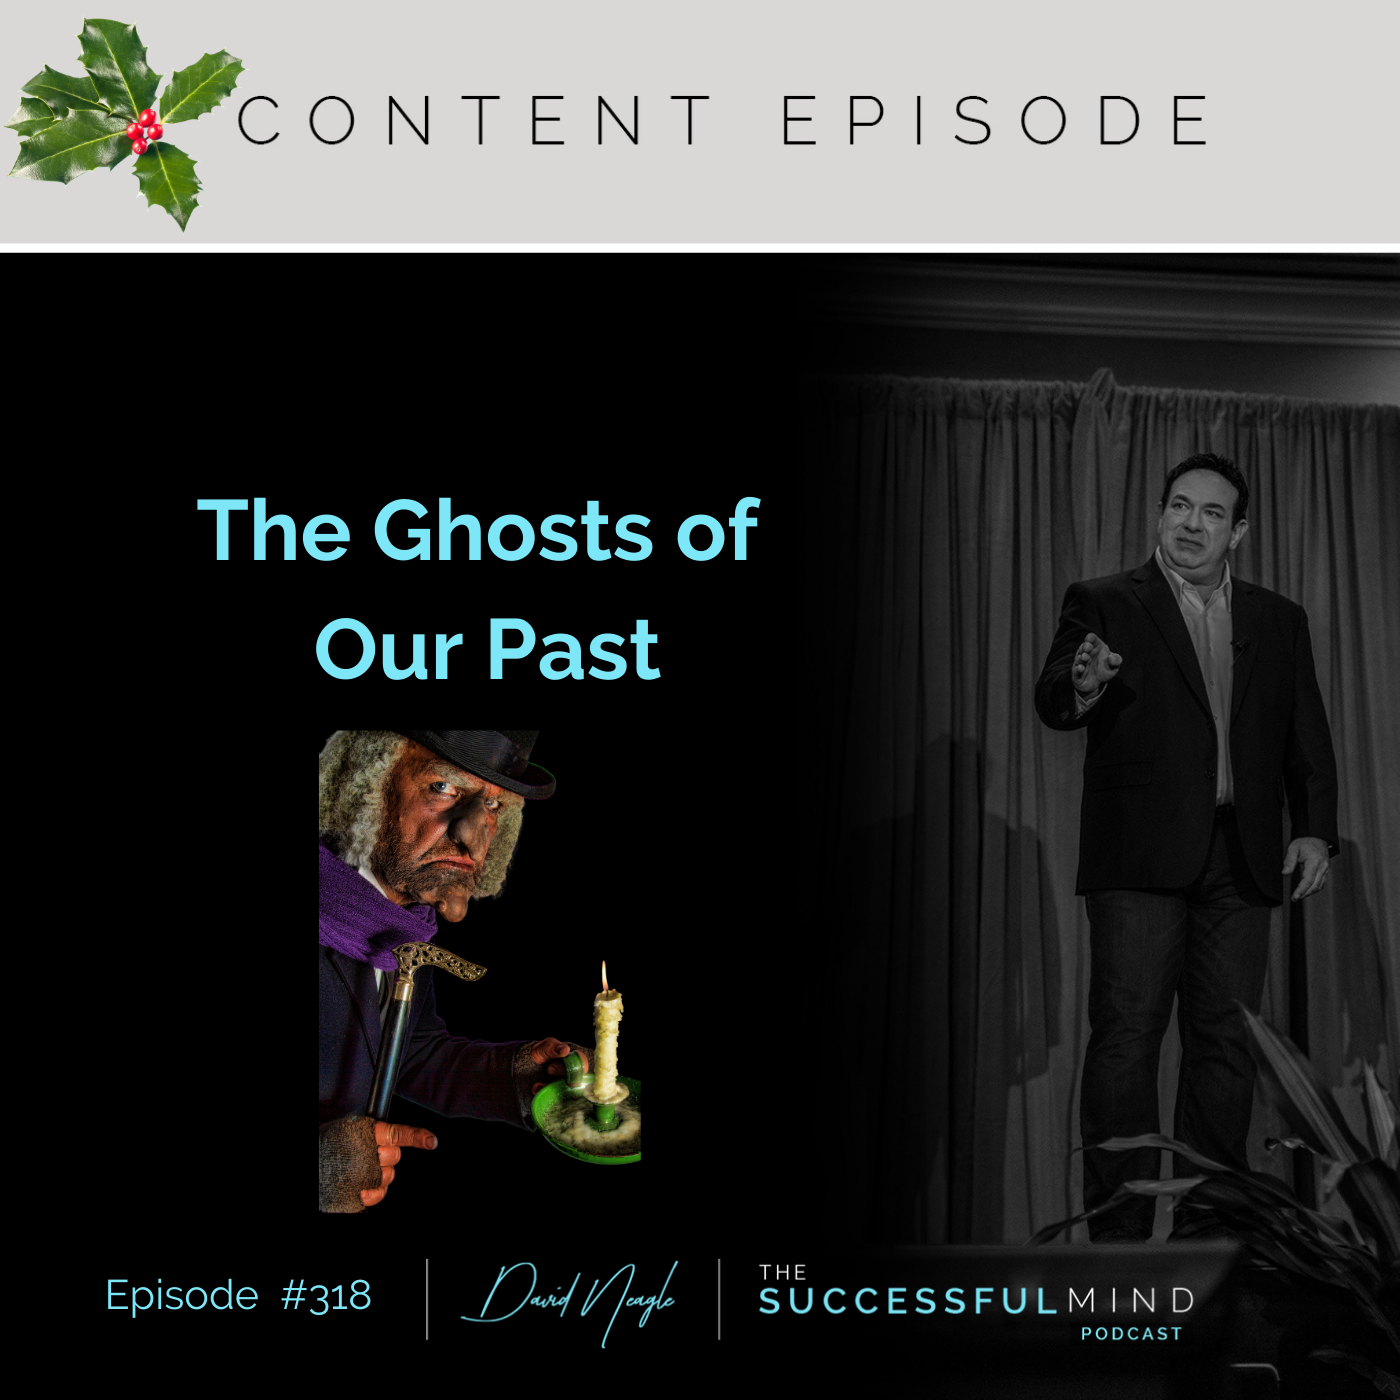 The Successful Mind Podcast - The Ghosts of Our Past